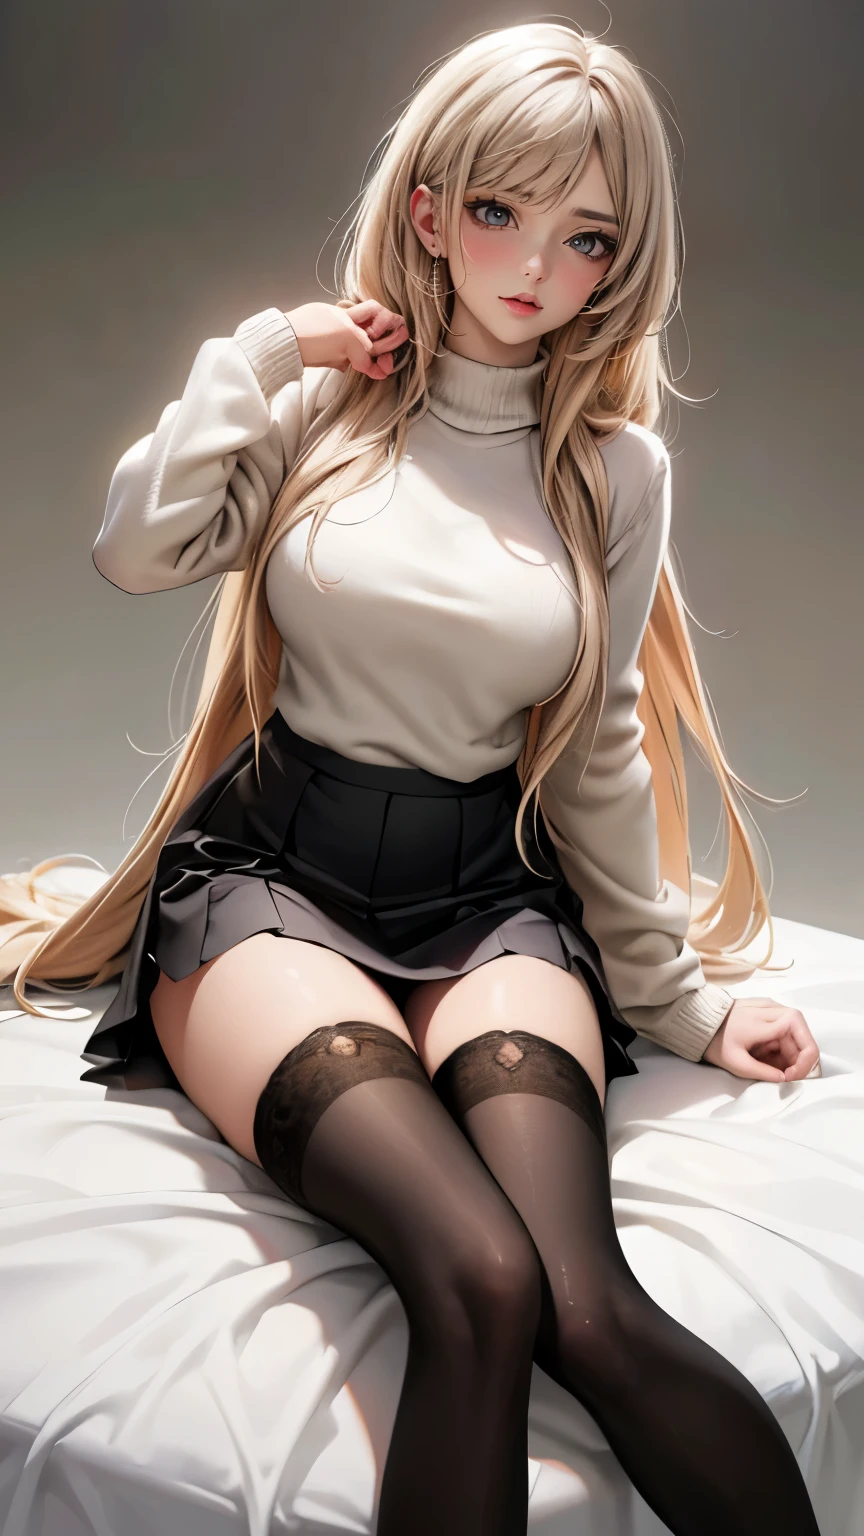 (Random Porn Pose),(Best image quality,(8k),Ultra-realistic,最high quality, high quality, High resolution, high quality texture,High detail,Beautiful details,Fine details,Highly detailed CG,Detailed Texture,Realistic facial expression,masterpiece,Presence),sweater,Tight mini skirt,stockings,Engineer boot